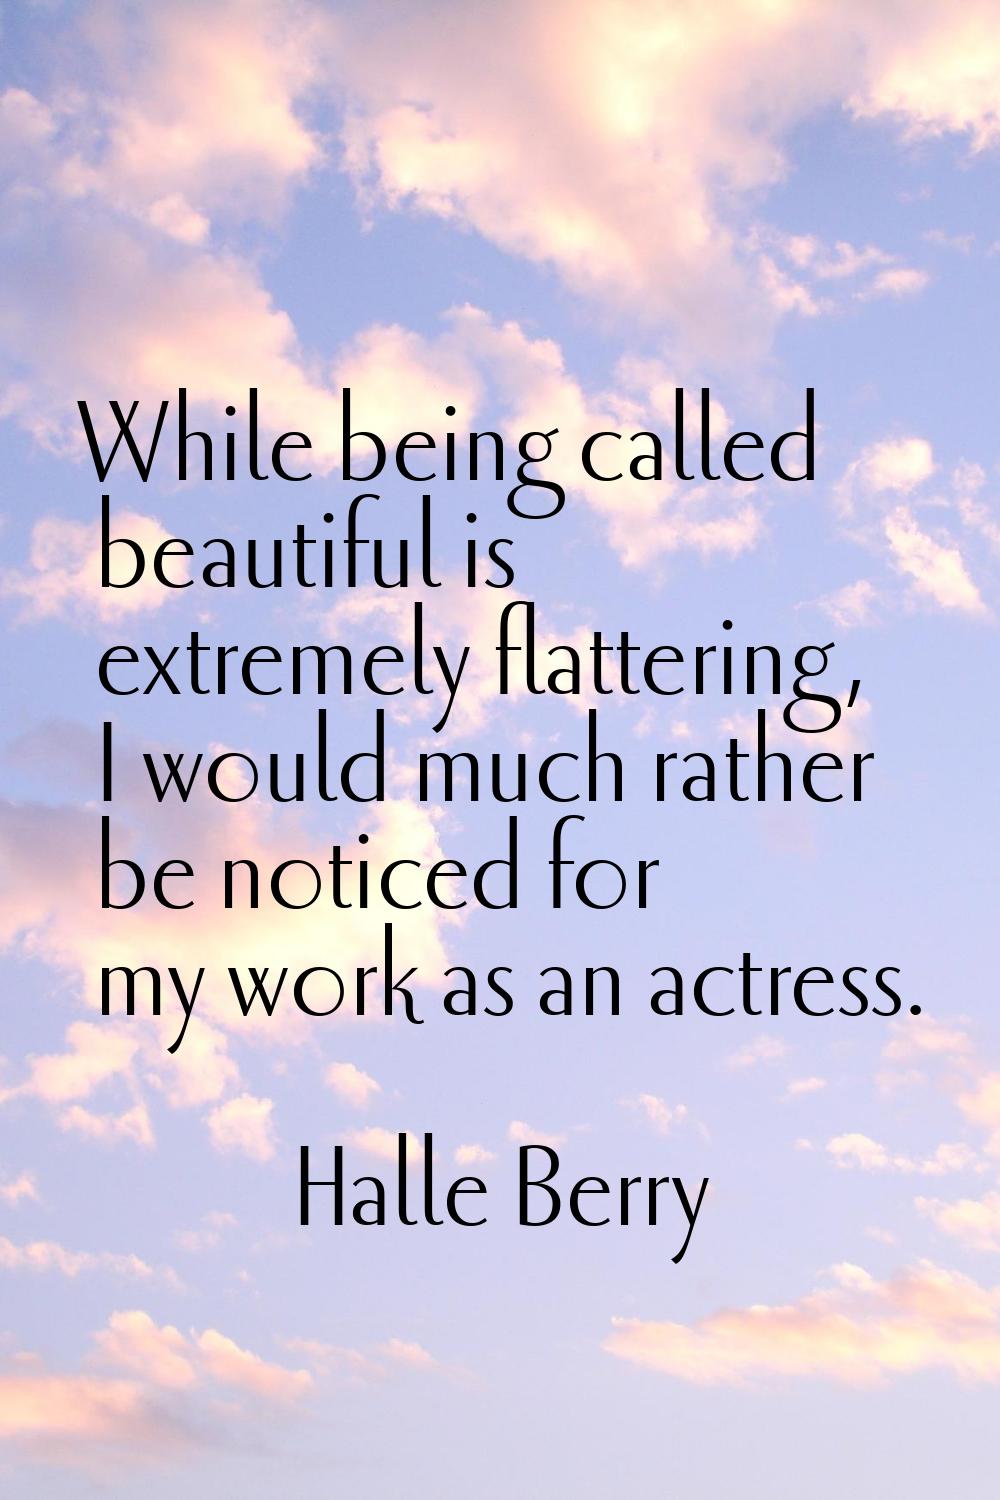 While being called beautiful is extremely flattering, I would much rather be noticed for my work as